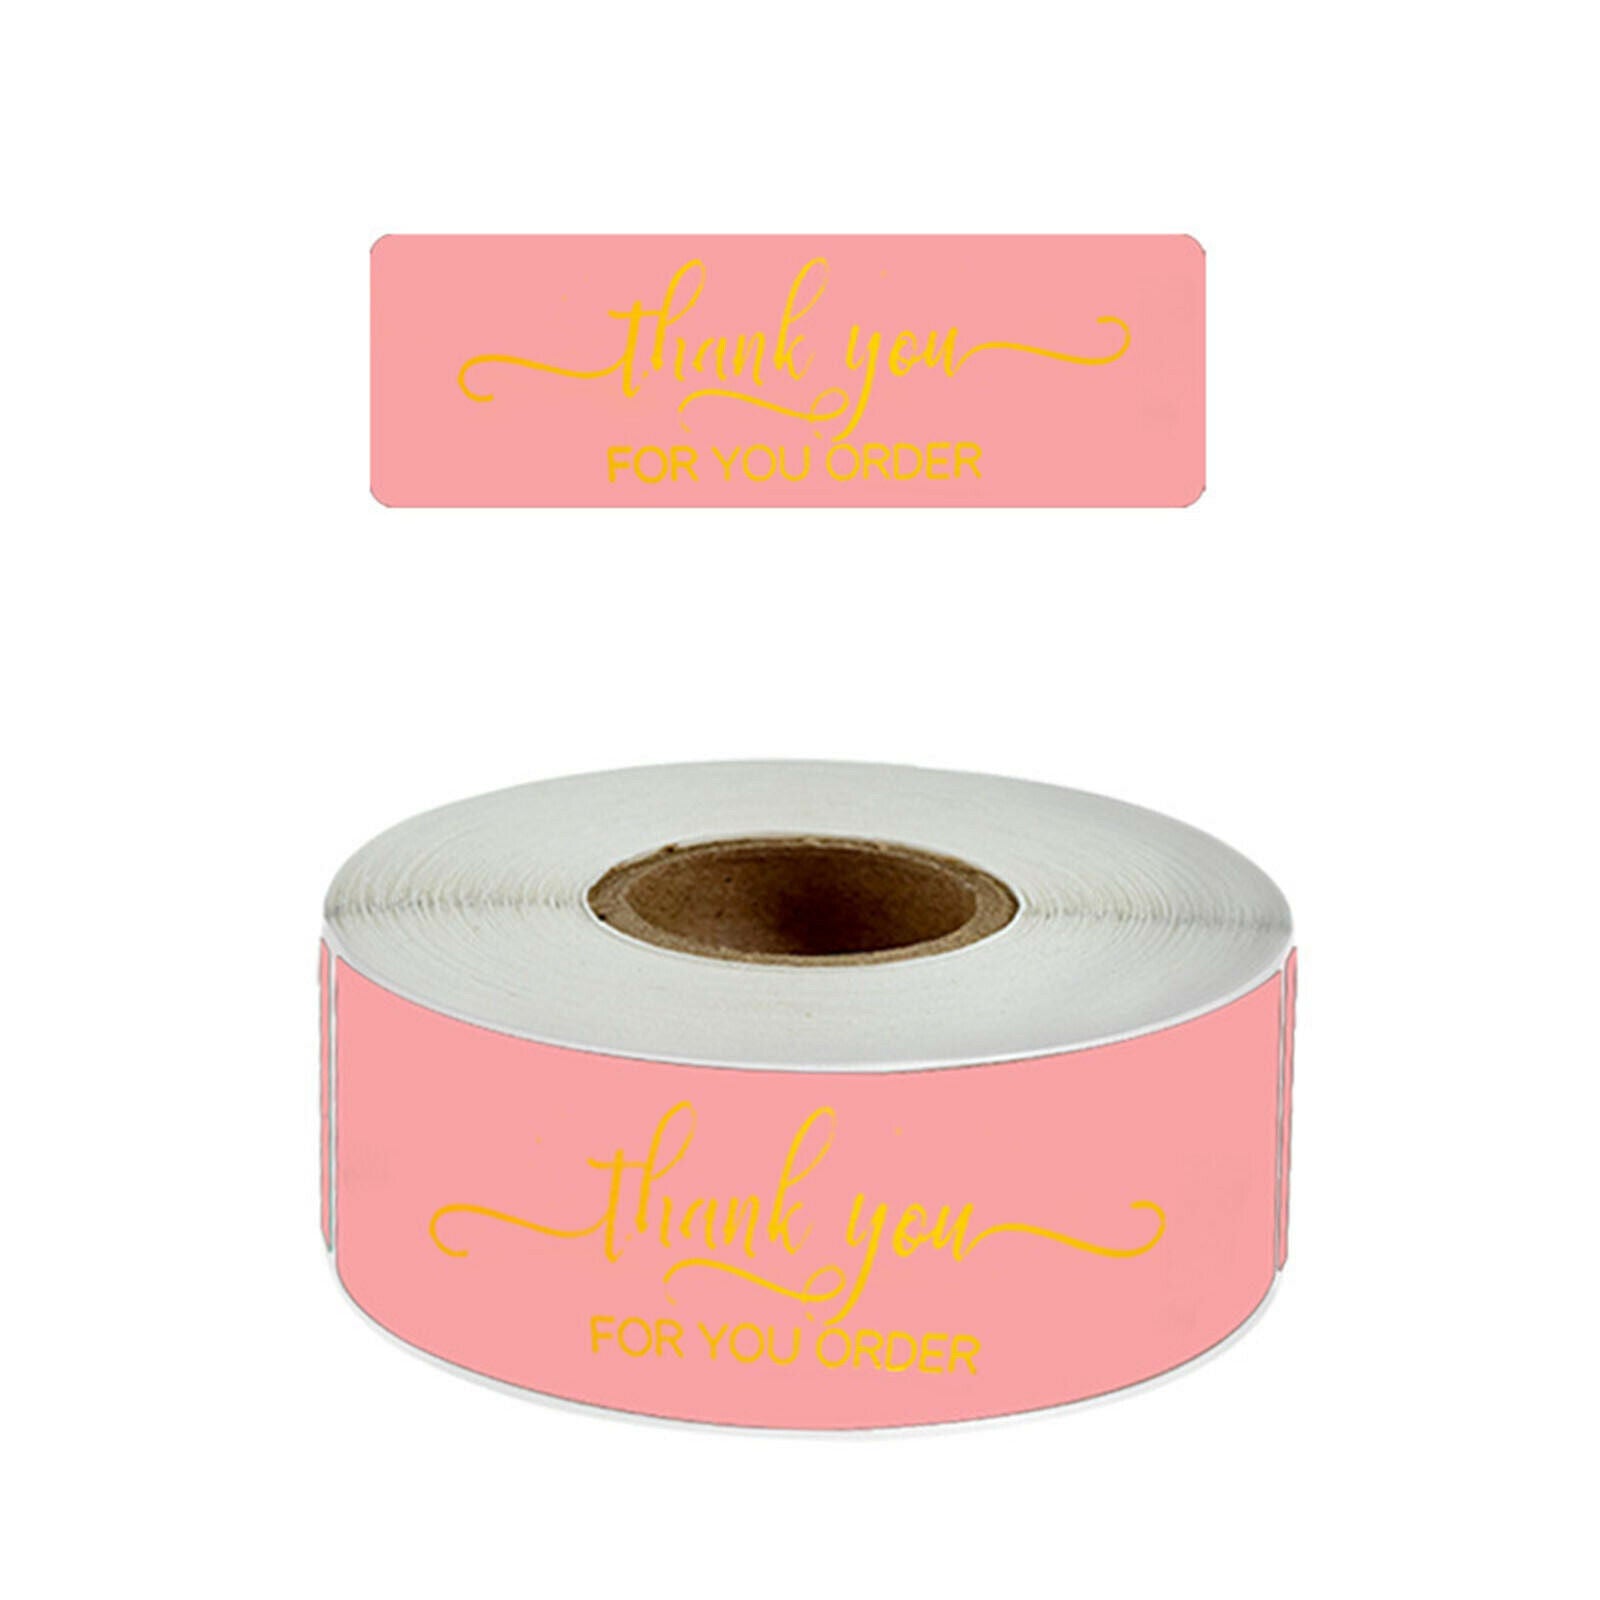 Thank You for Your Order Stickers Labels for Small Business Owners